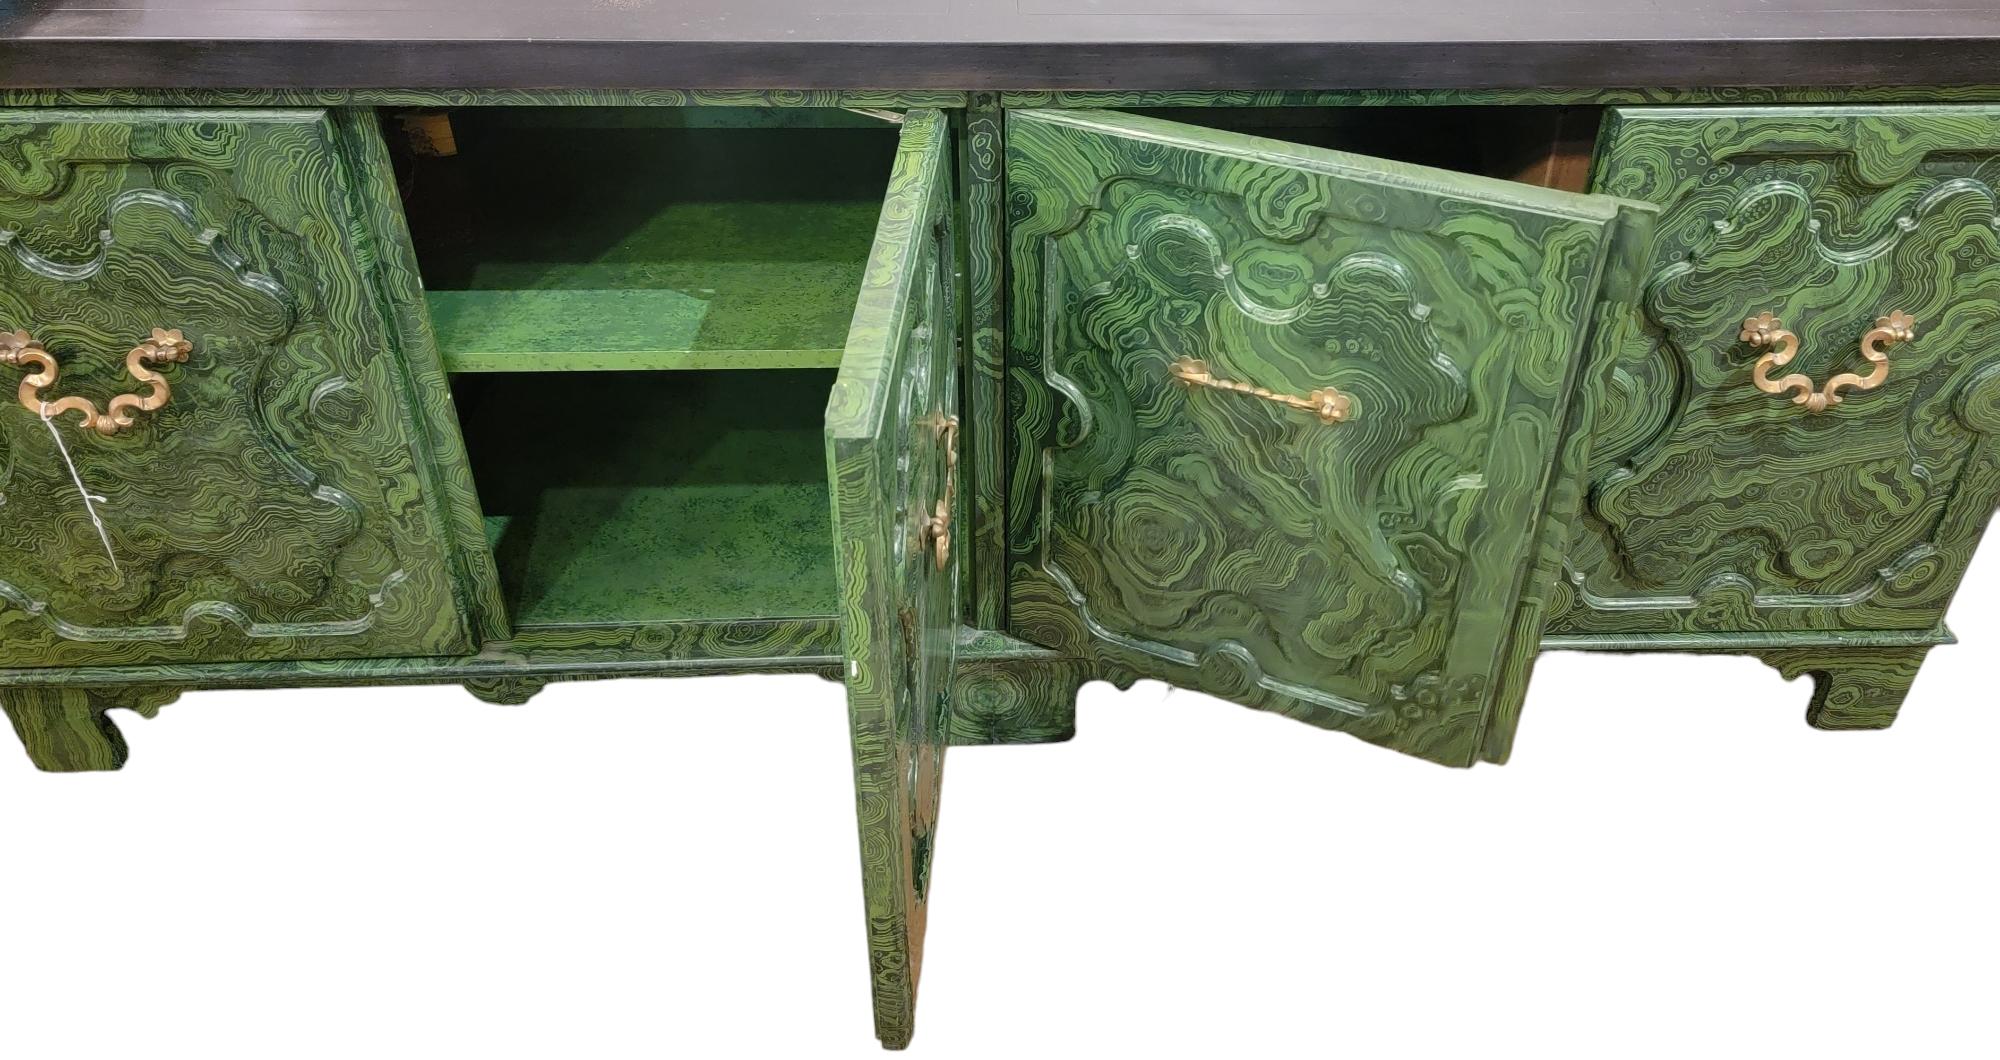 Hand Painted Baker 4 Door Credenza With Ornate Brass Handles by Tony Duquette 2